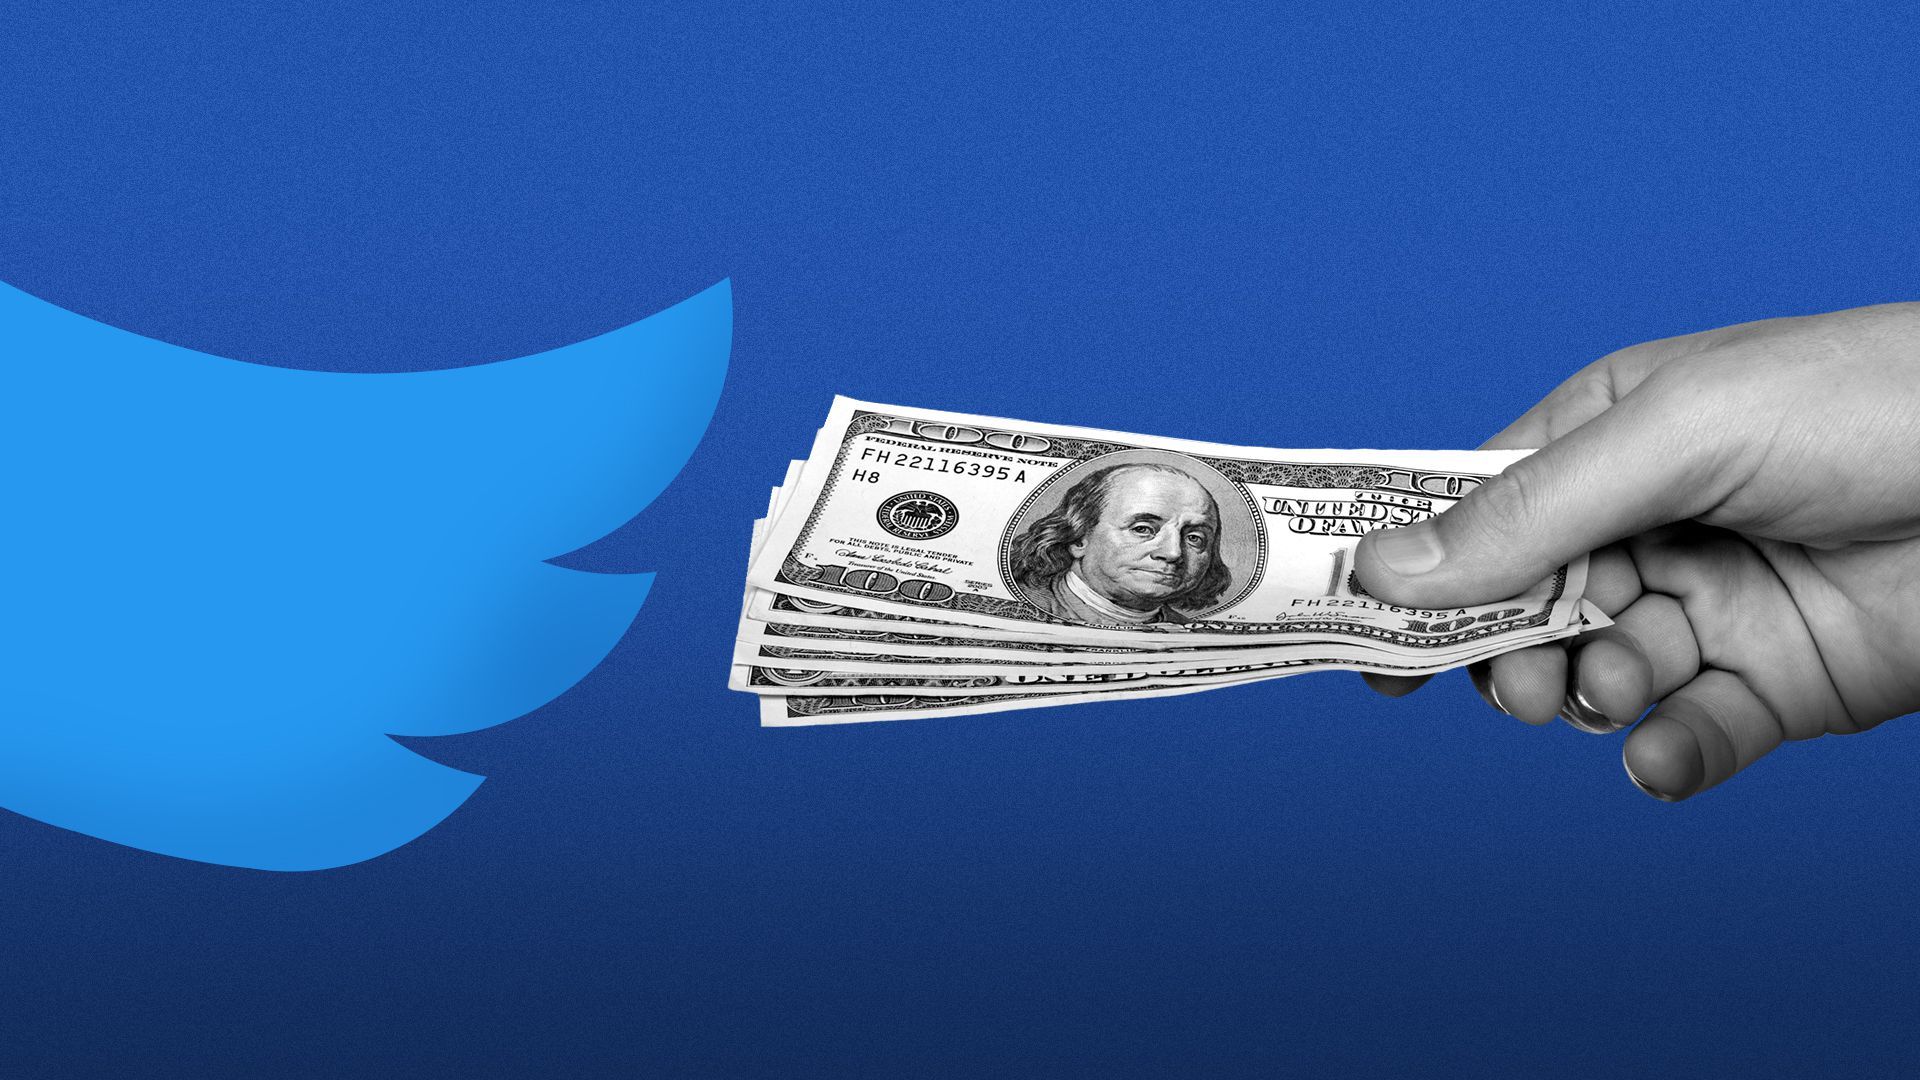 Illustration of a hand giving money to the Twitter bird logo.